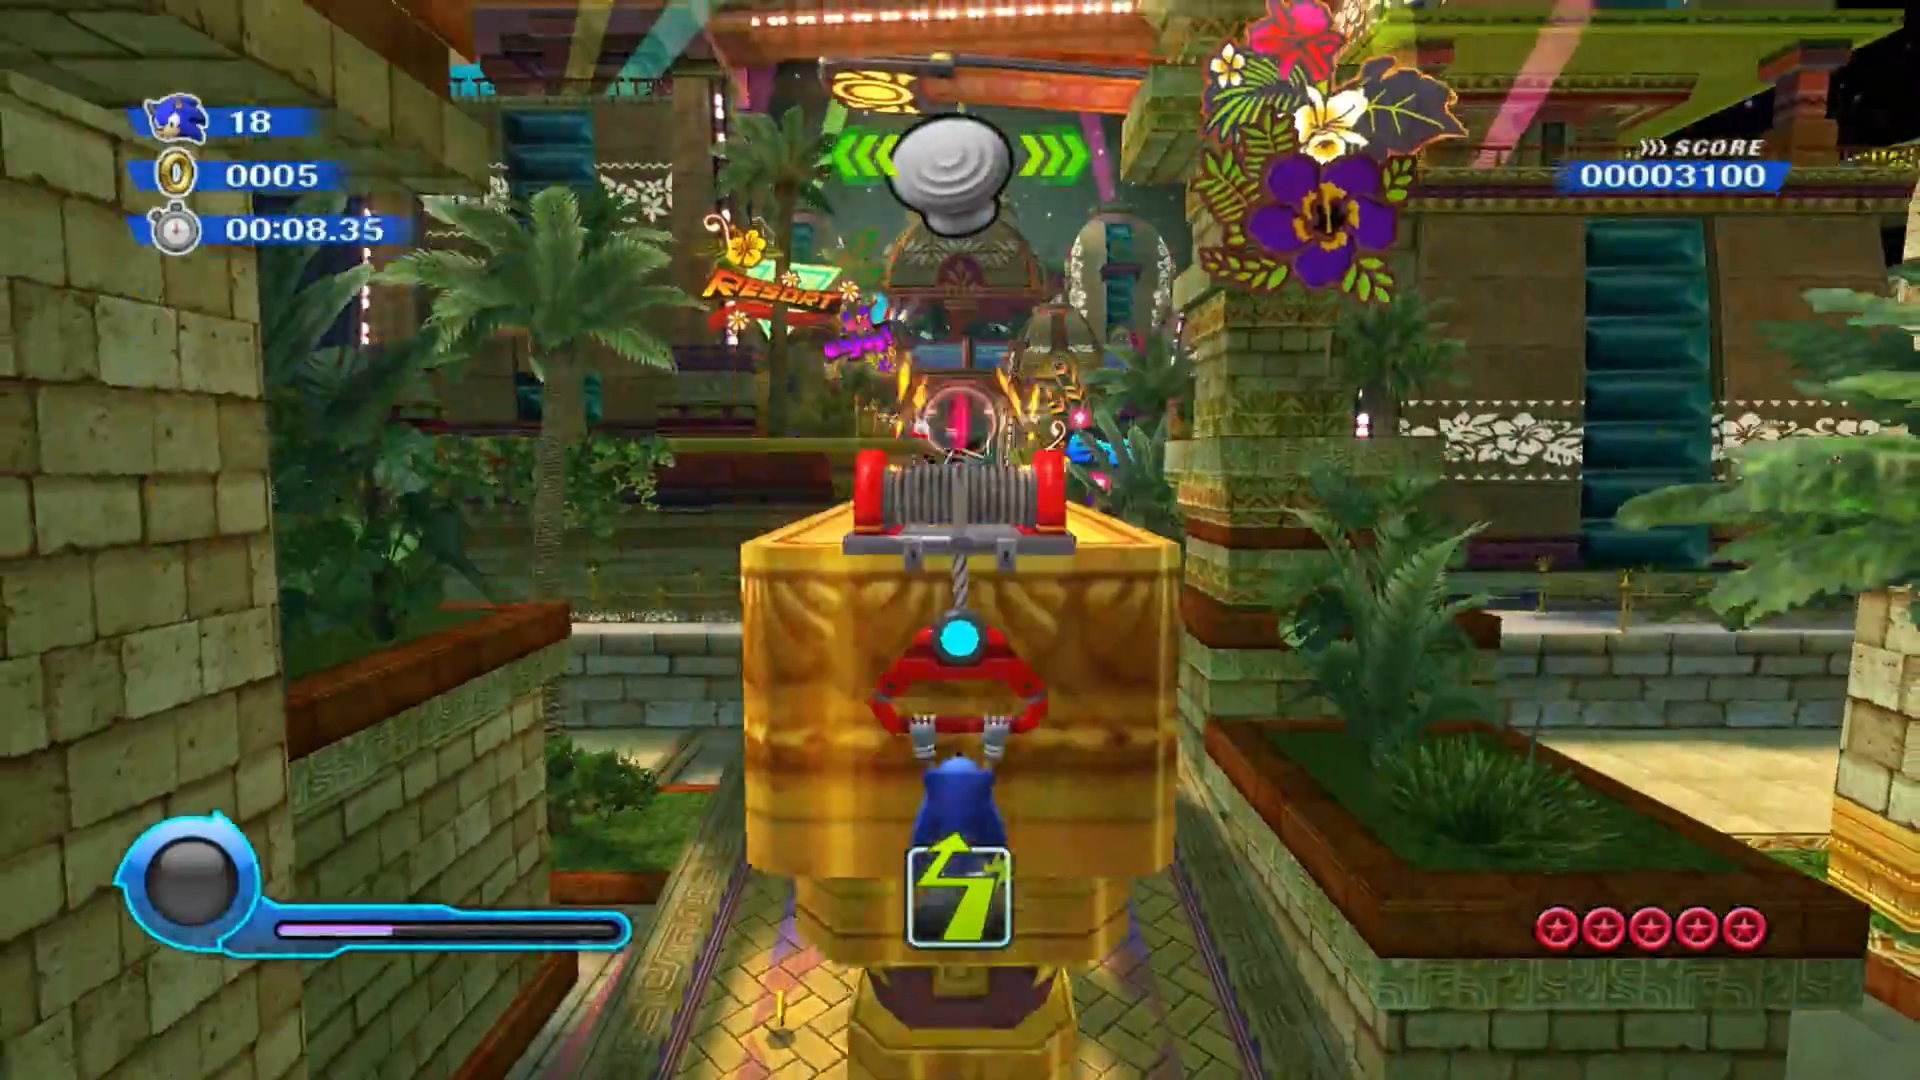 Sonic Colors Ultimate Demo - New Gameplay and Features Breakdown 